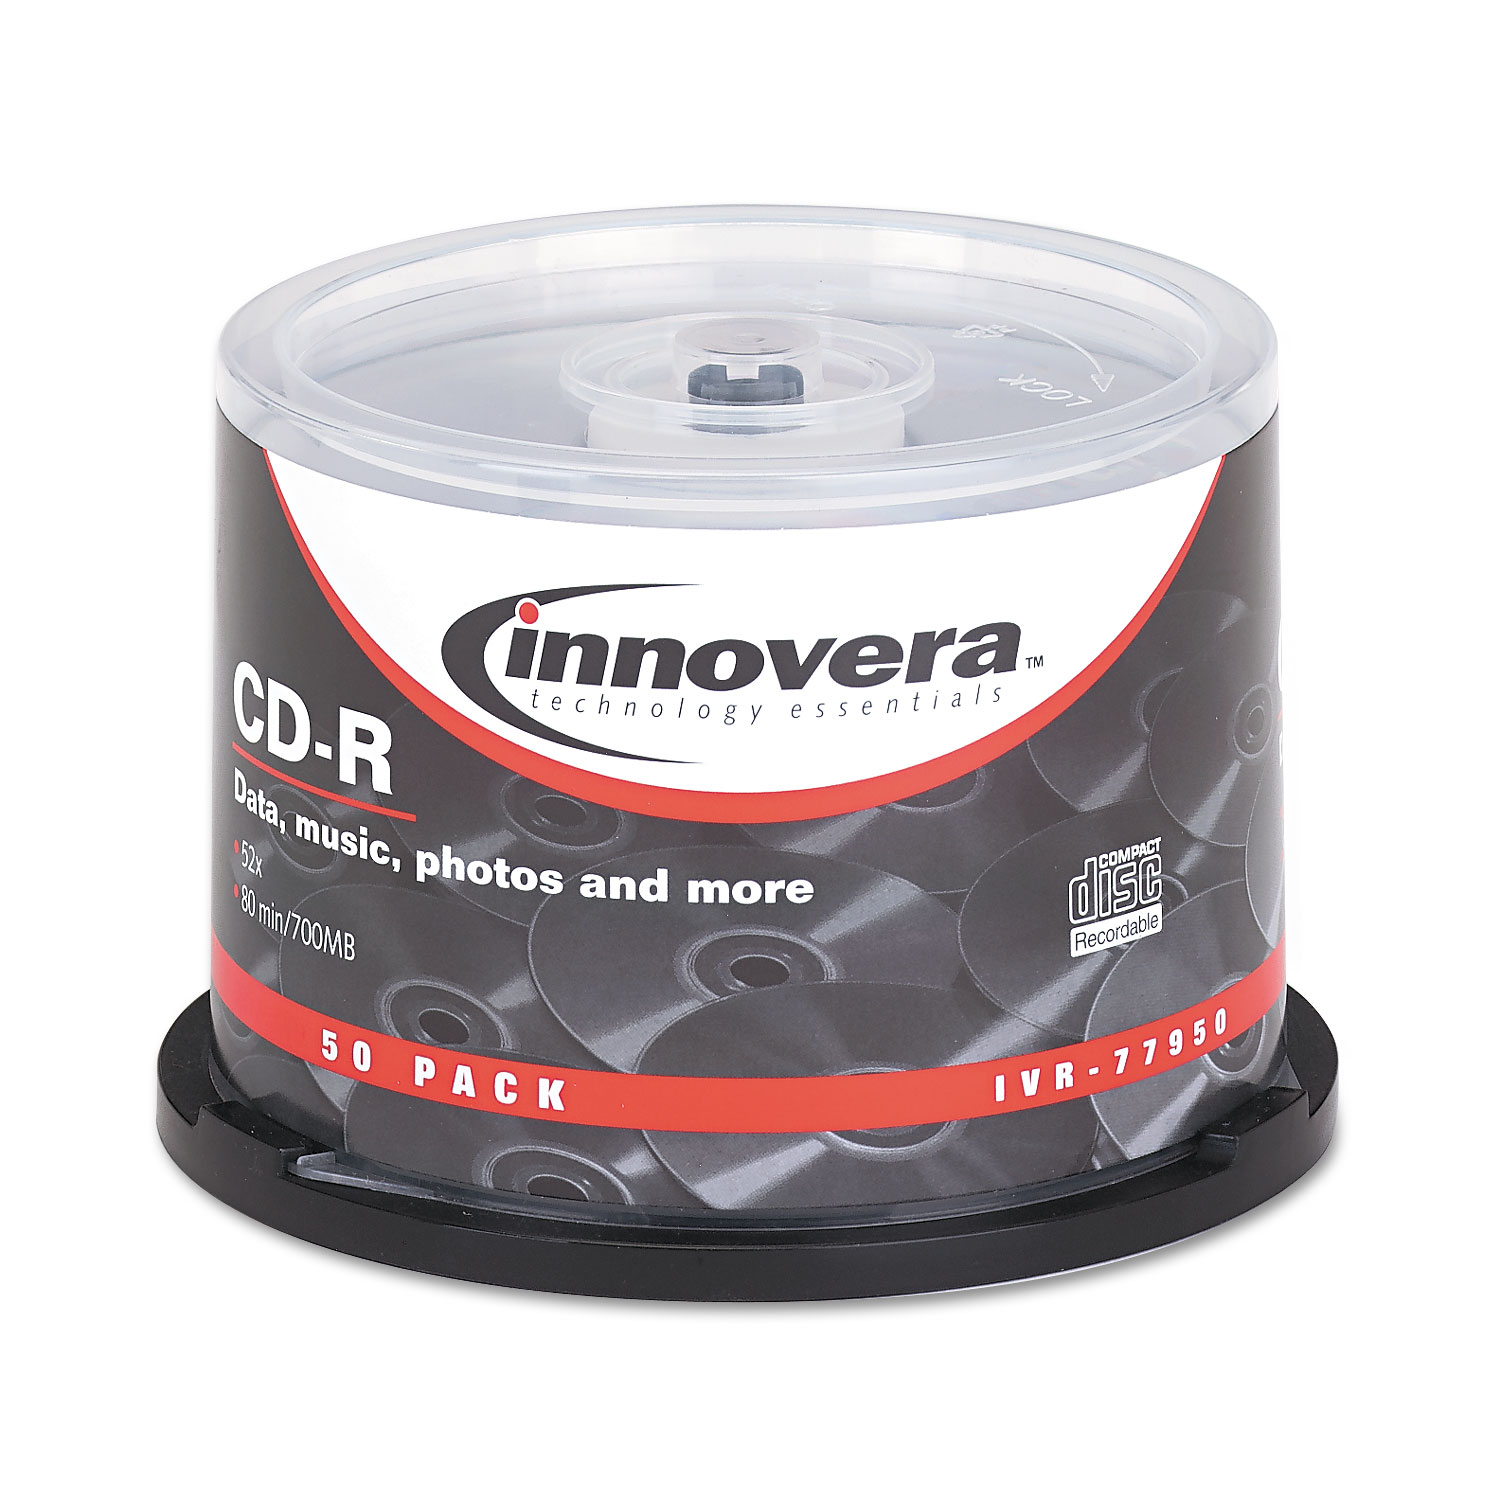  Innovera IVR77950 CD-R Discs, 700MB/80min, 52x, Spindle, Silver, 50/Pack (IVR77950) 